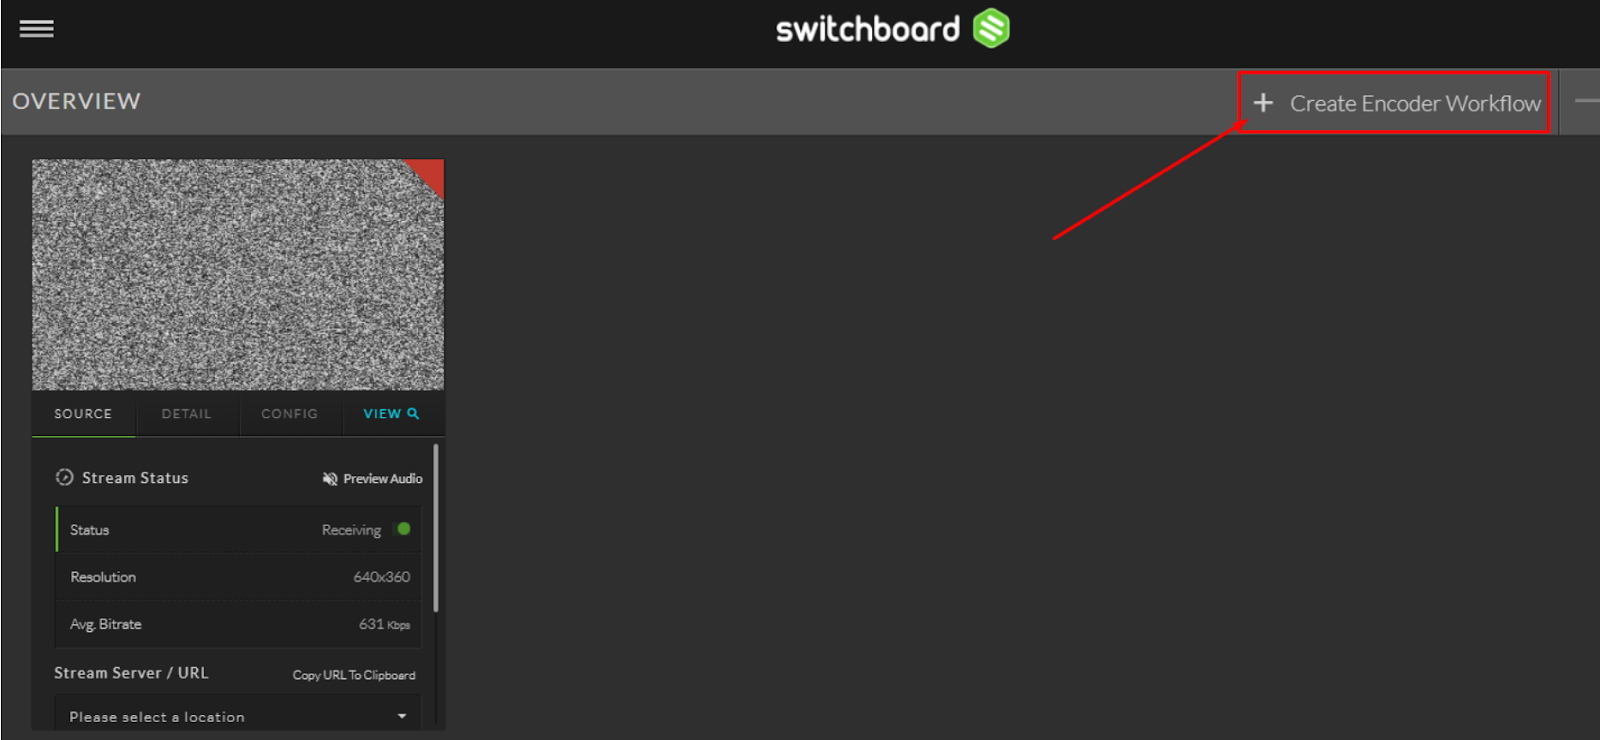 How to stream to Dacast using Switchboard Live - Switchboard Step 1